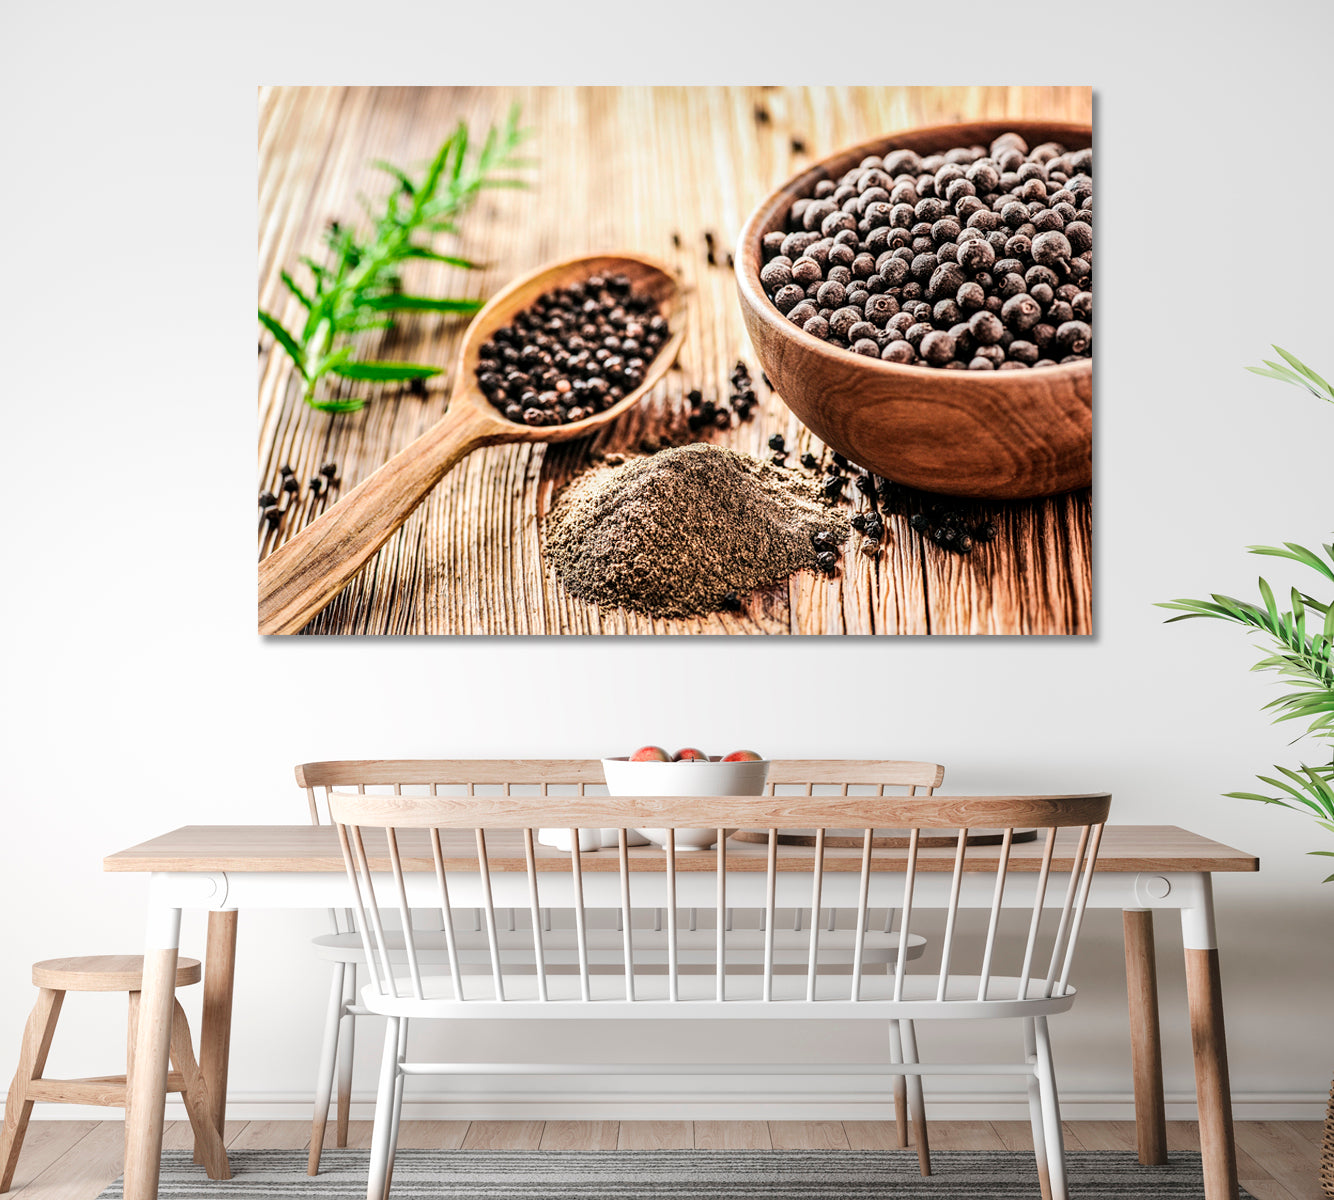 Black Pepper Canvas Print ArtLexy 1 Panel 24"x16" inches 